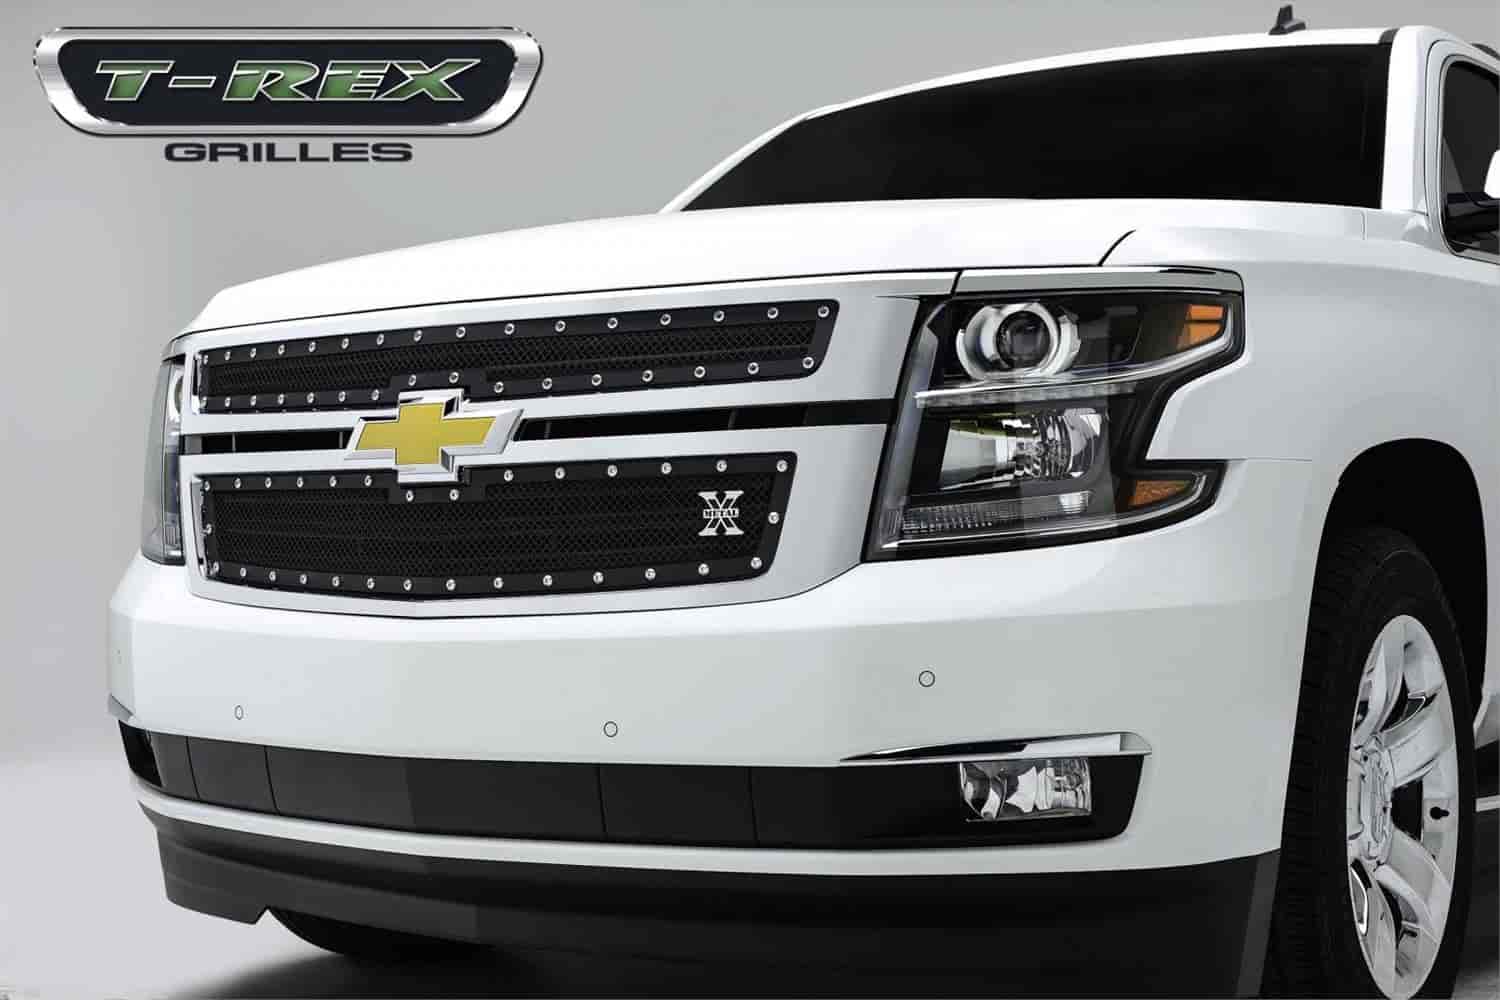 X-METAL Series Studded Main Grille Overlay 2015-2016 Chevrolet Tahoe & Suburban